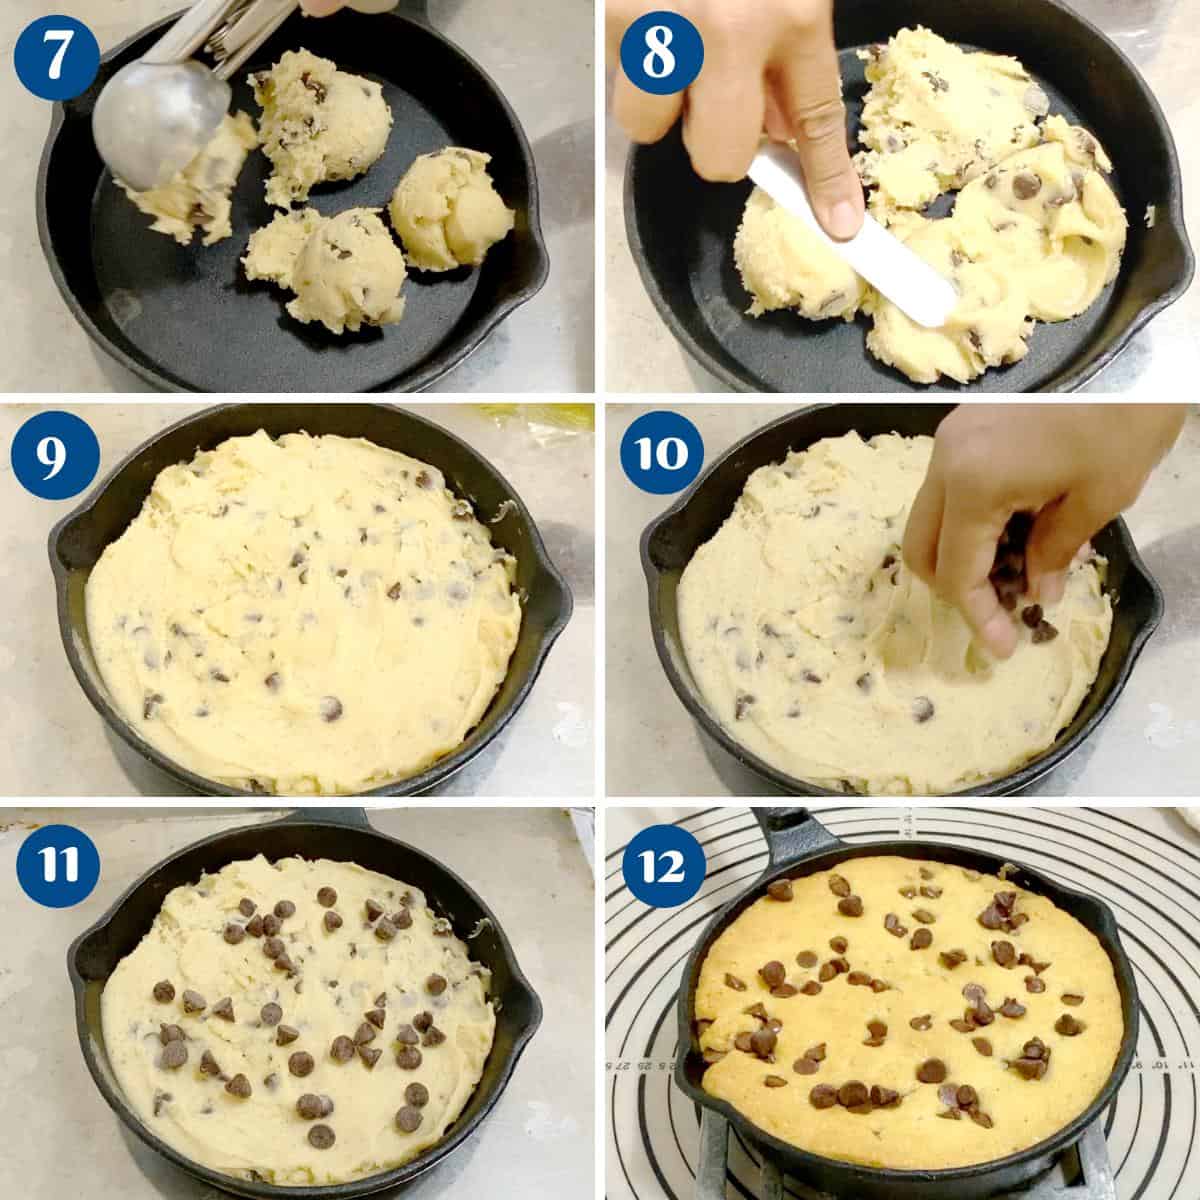 Progress pictures - making a giant chocolate chip cookie in a skillet.